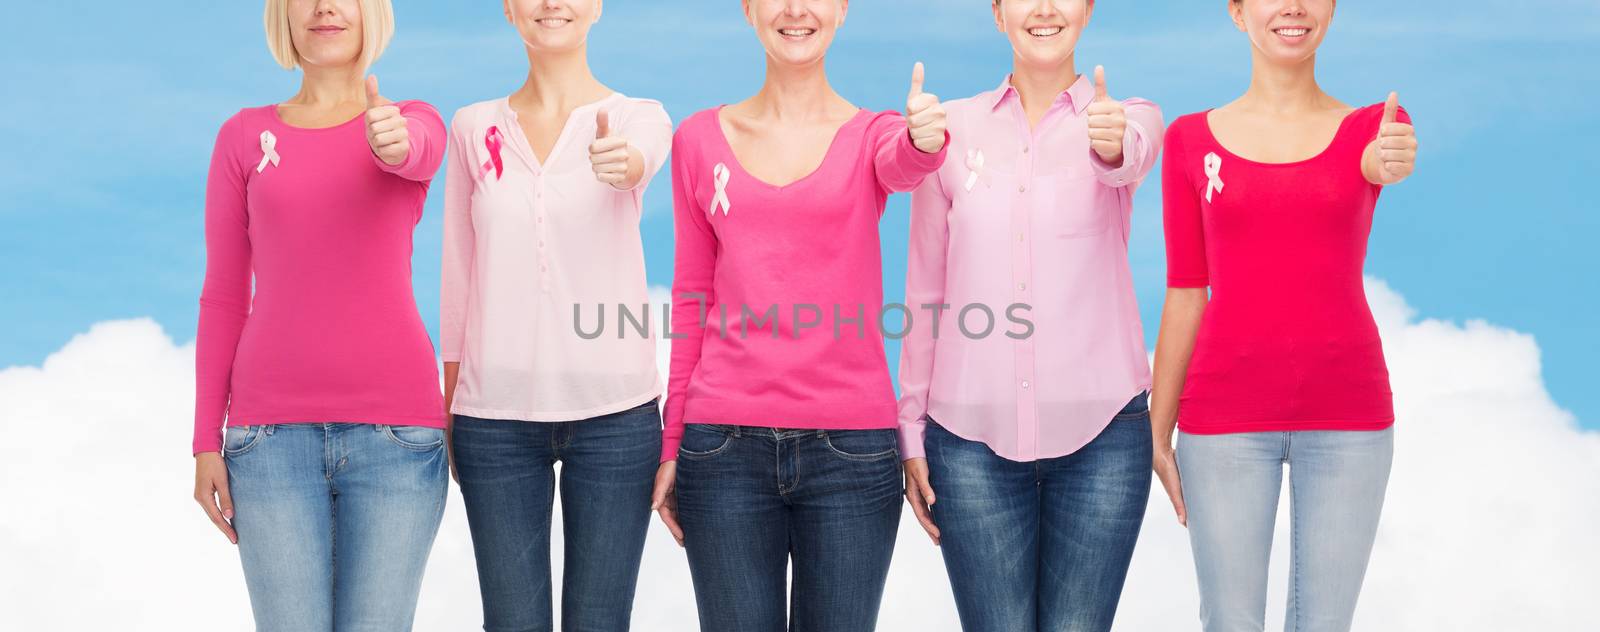 healthcare, people, gesture and medicine concept - close up of smiling women in blank shirts with pink breast cancer awareness ribbons over blue sky and white cloud background